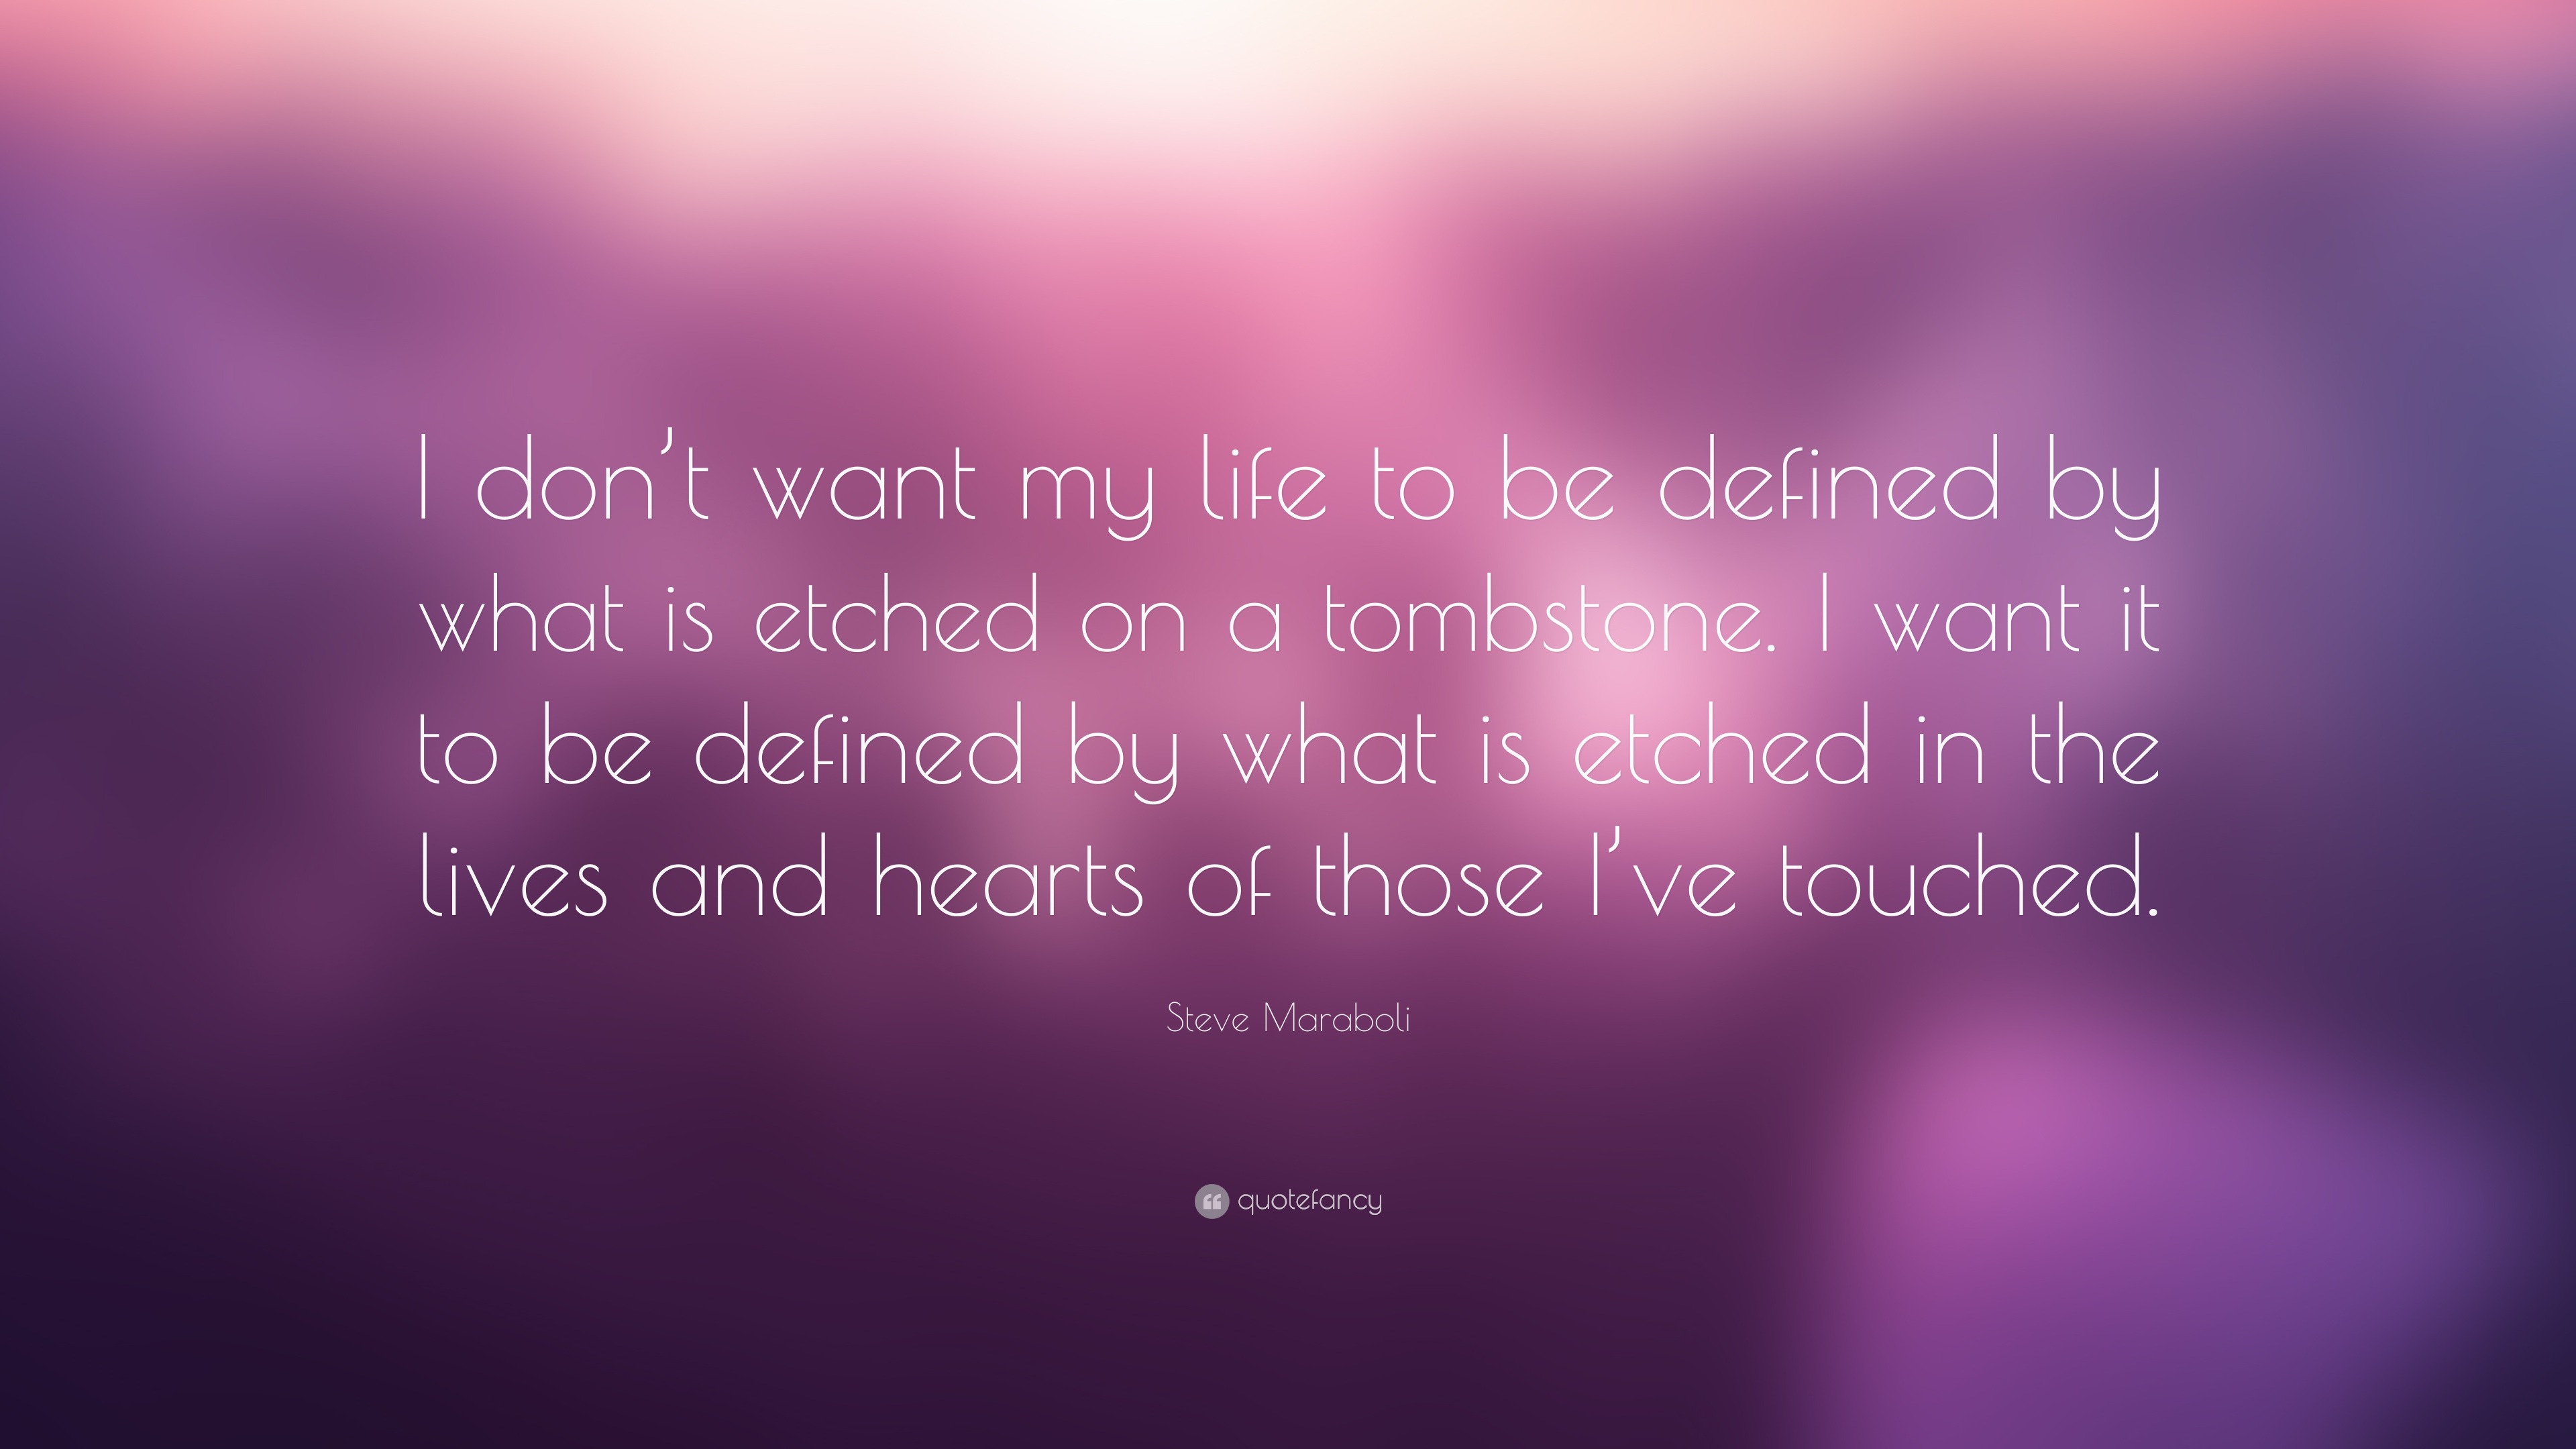 Steve Maraboli Quote: “I don’t want my life to be defined by what is ...